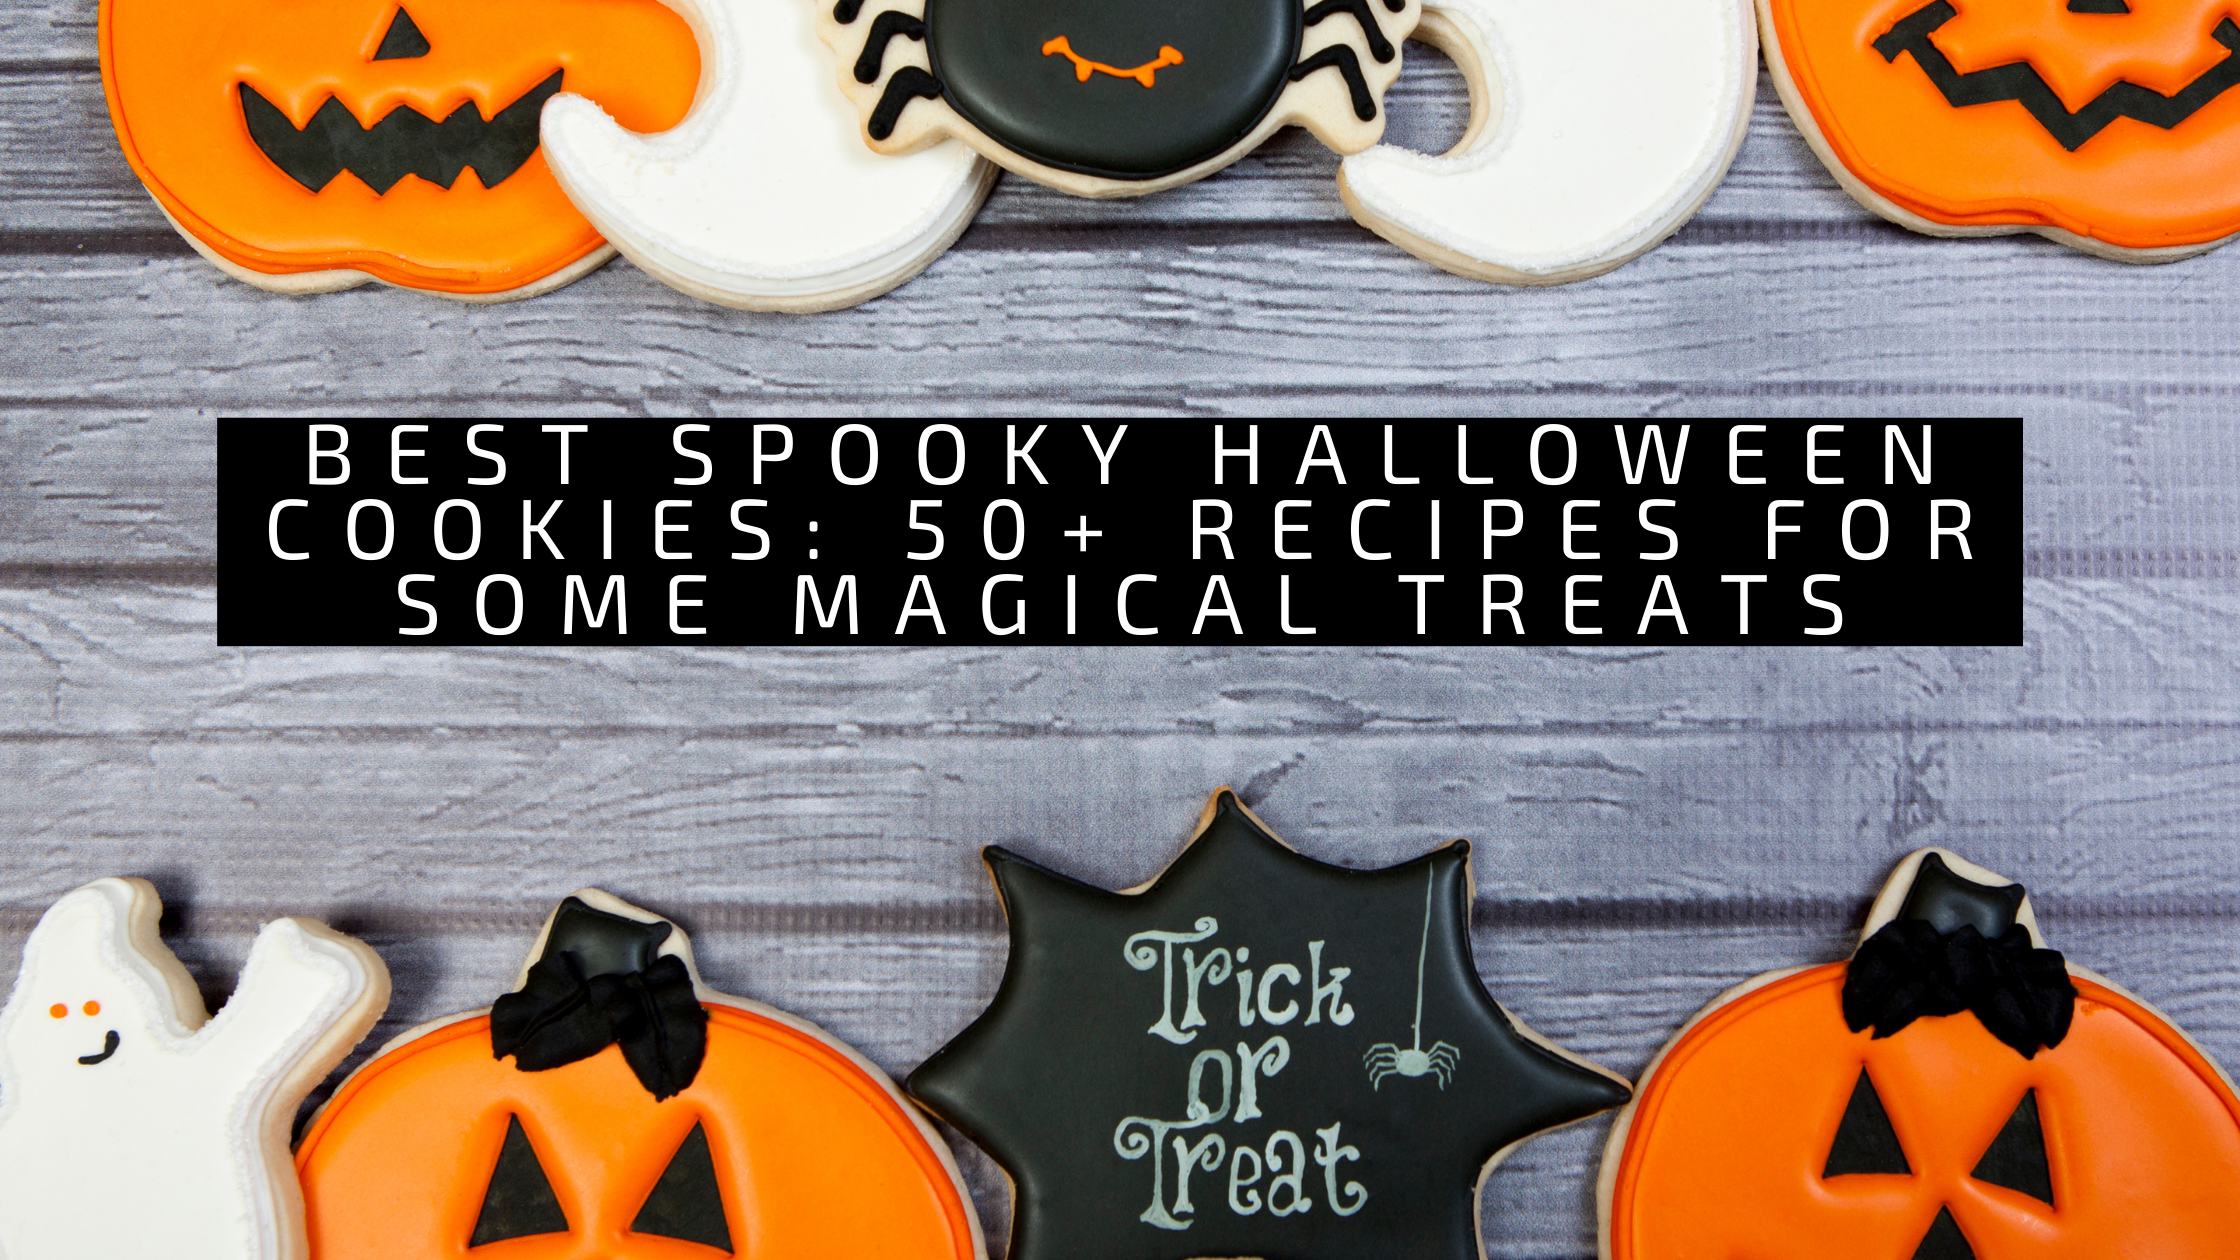 Best Spooky Halloween Cookies: 50+ Recipes for Some Magical Treats 2